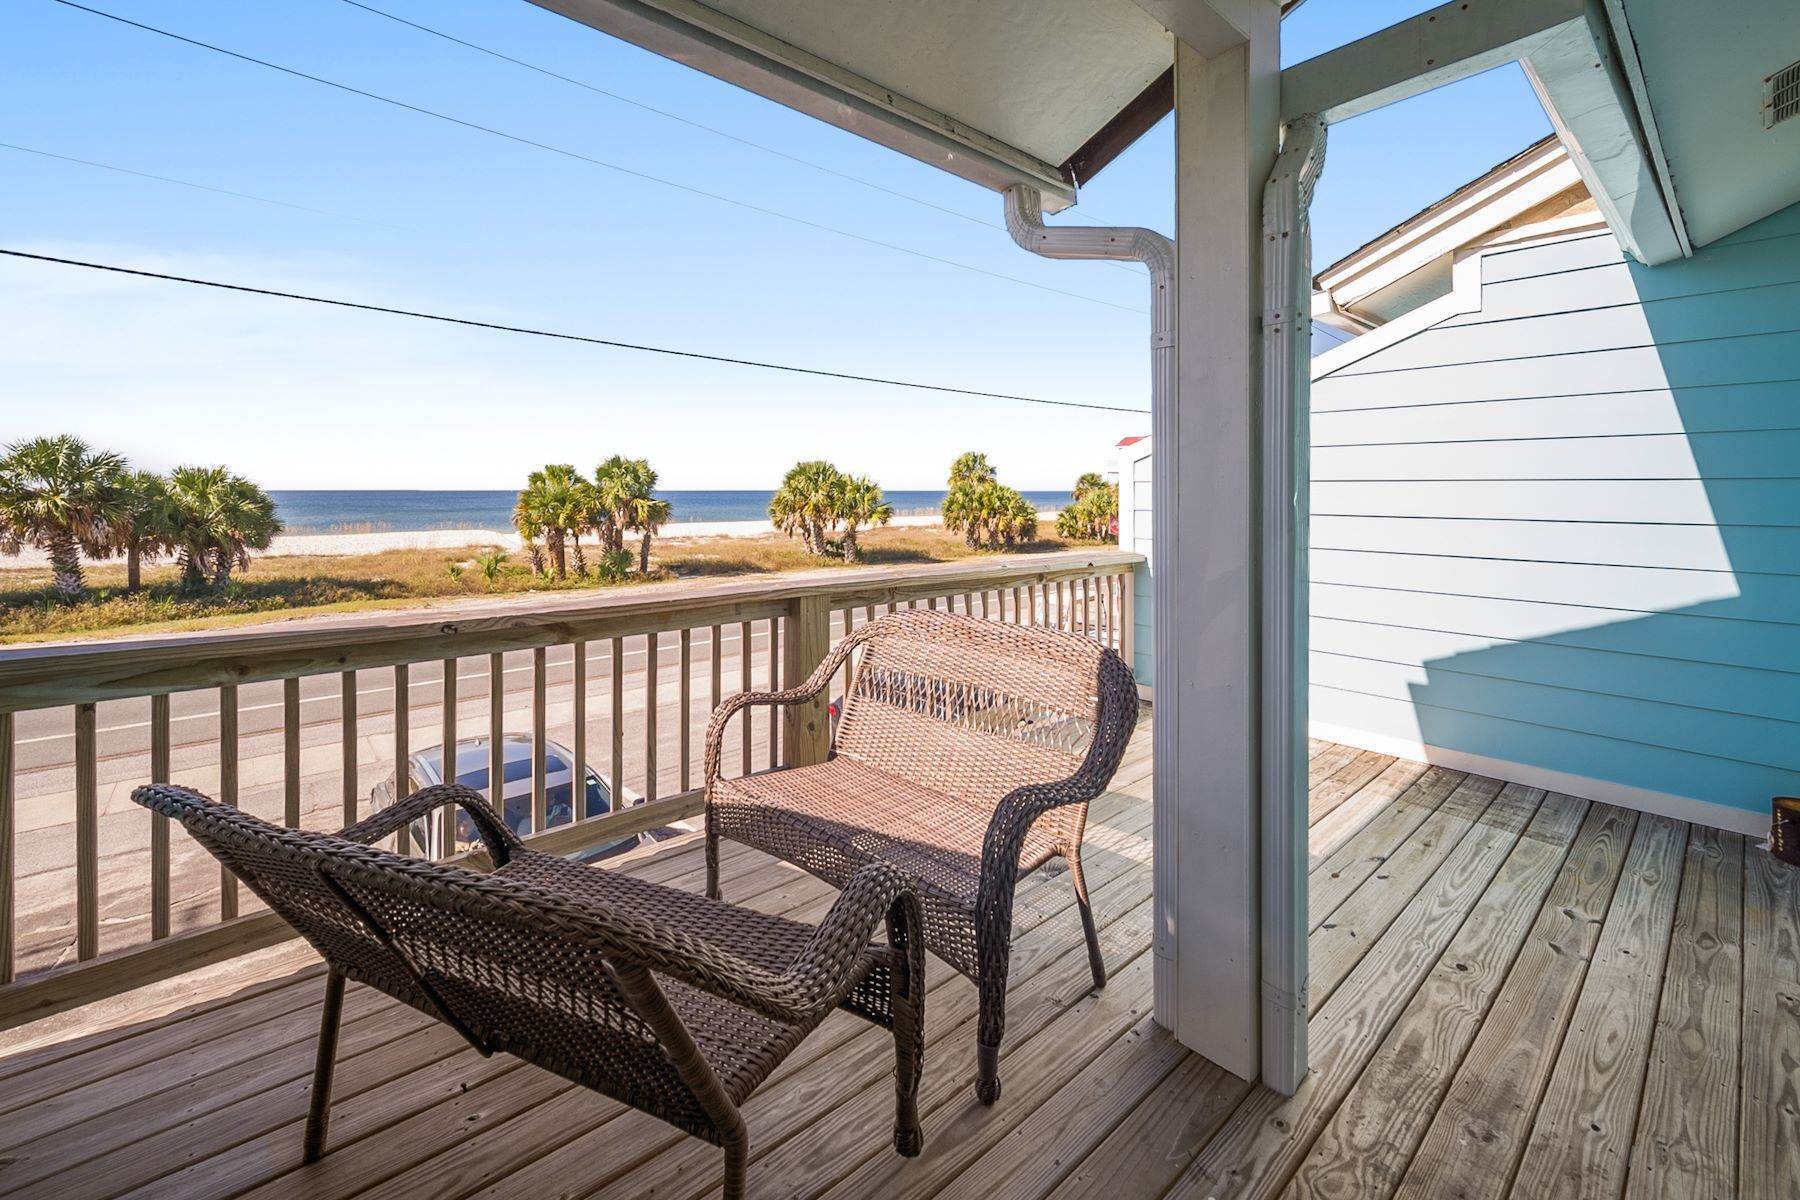 Townhouse for Sale at Renovated Townhouse Overlooking Beach With Private Yard And Gulf Views 7314 West Highway 98 Port St. Joe, Florida 32456 United States